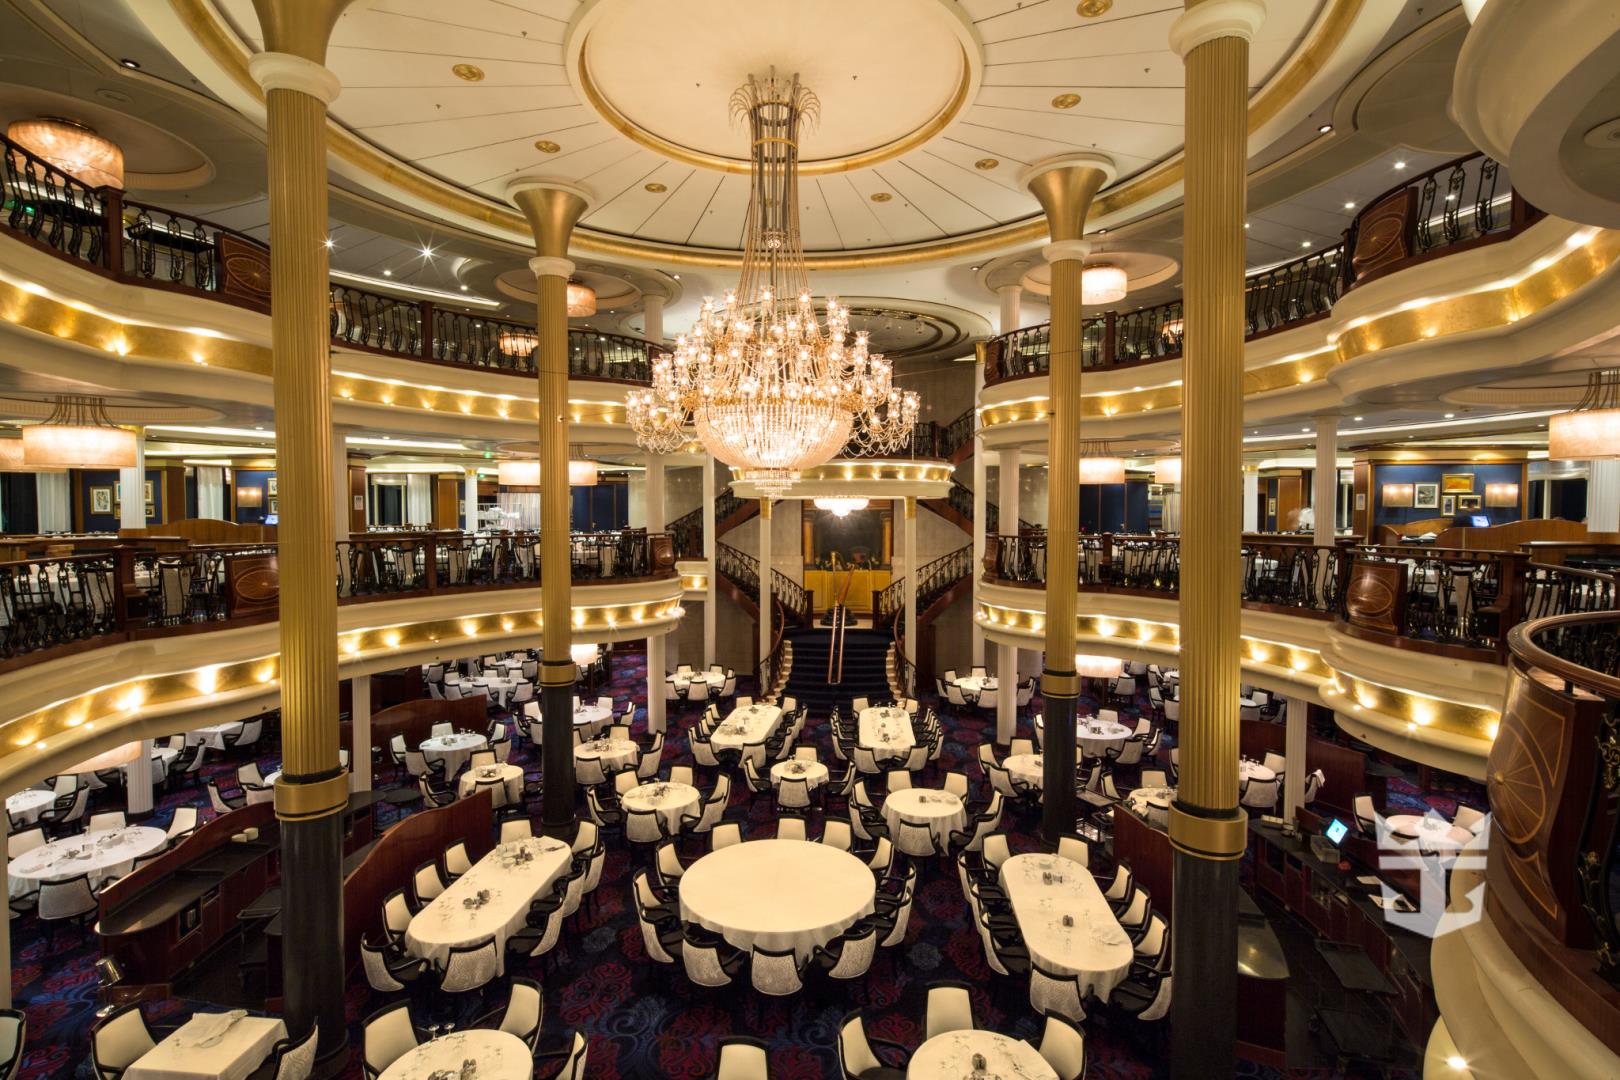 View of chandelier and seating in main dining room